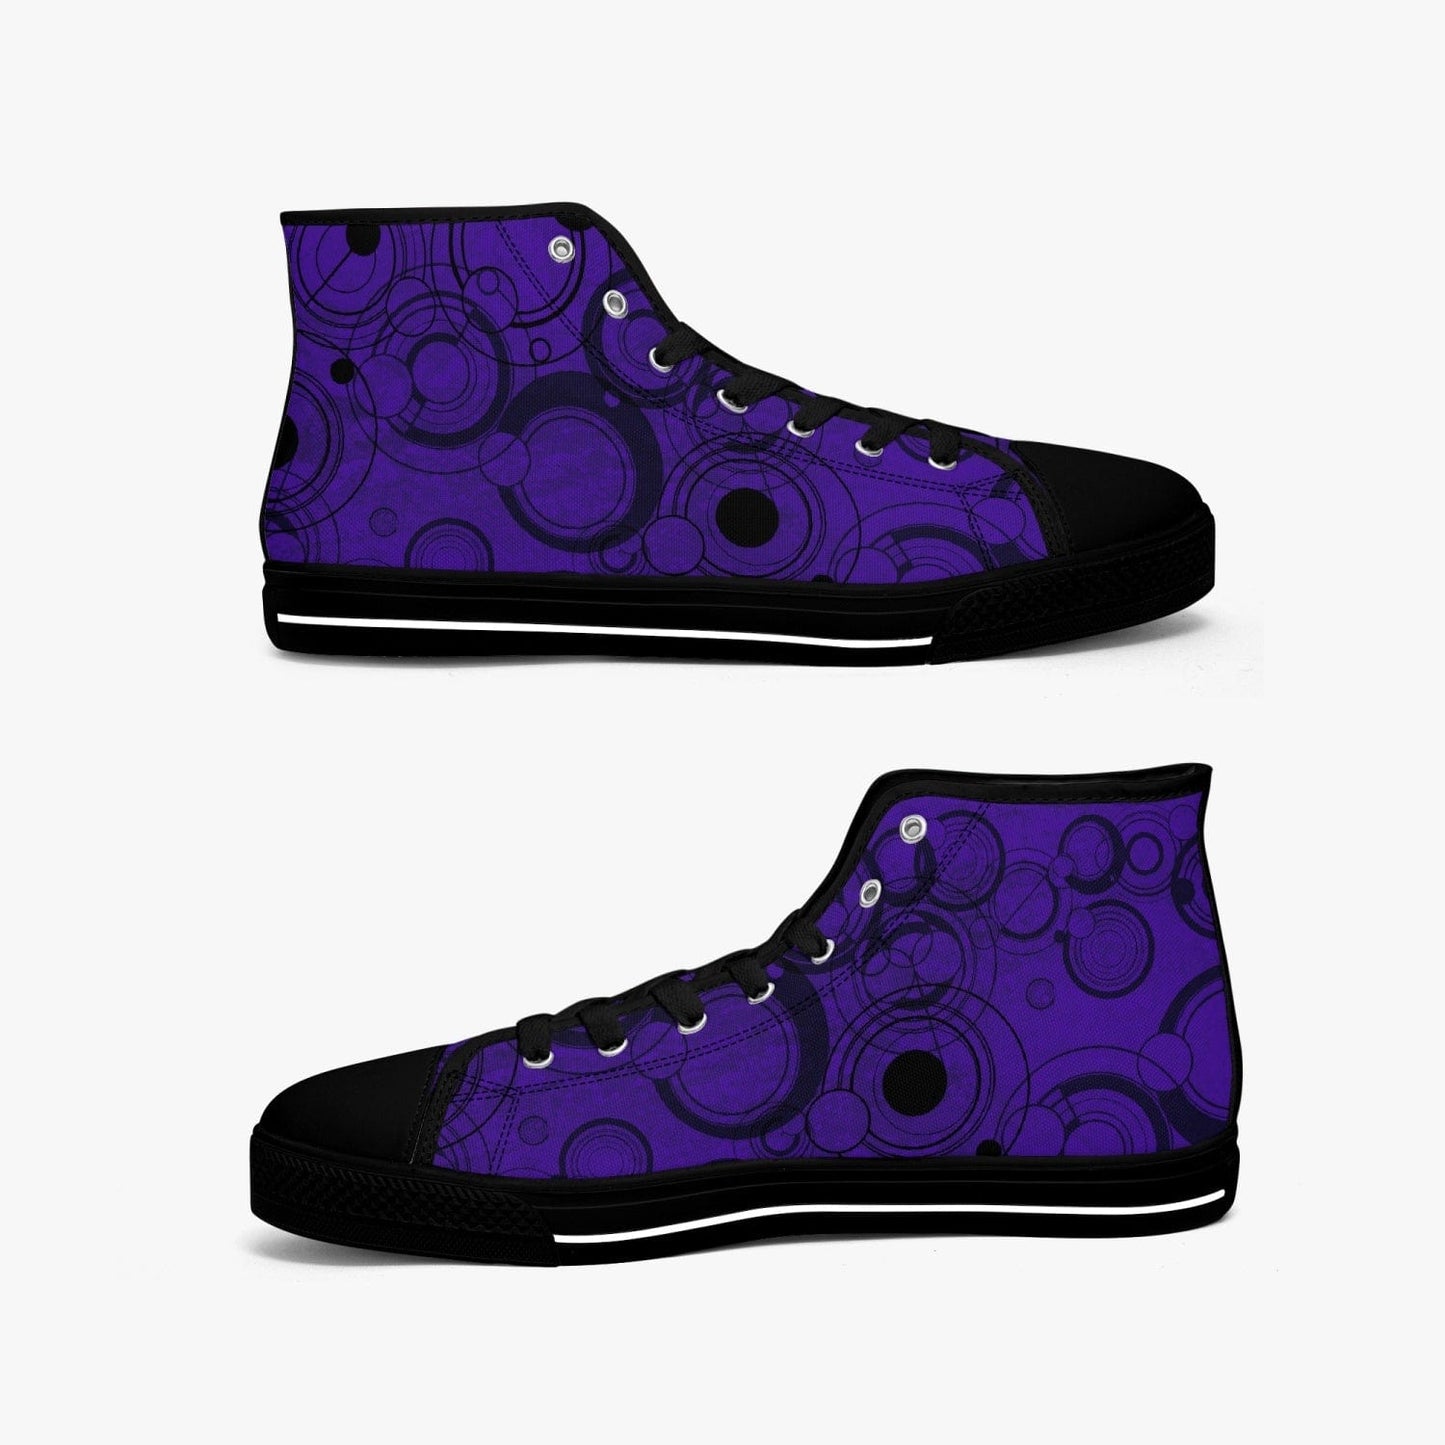 profile side view of Women's Time Lord Gallifreyan Gallifrey language retro sneakers in a vivid gothic purple at Gallery Serpentine